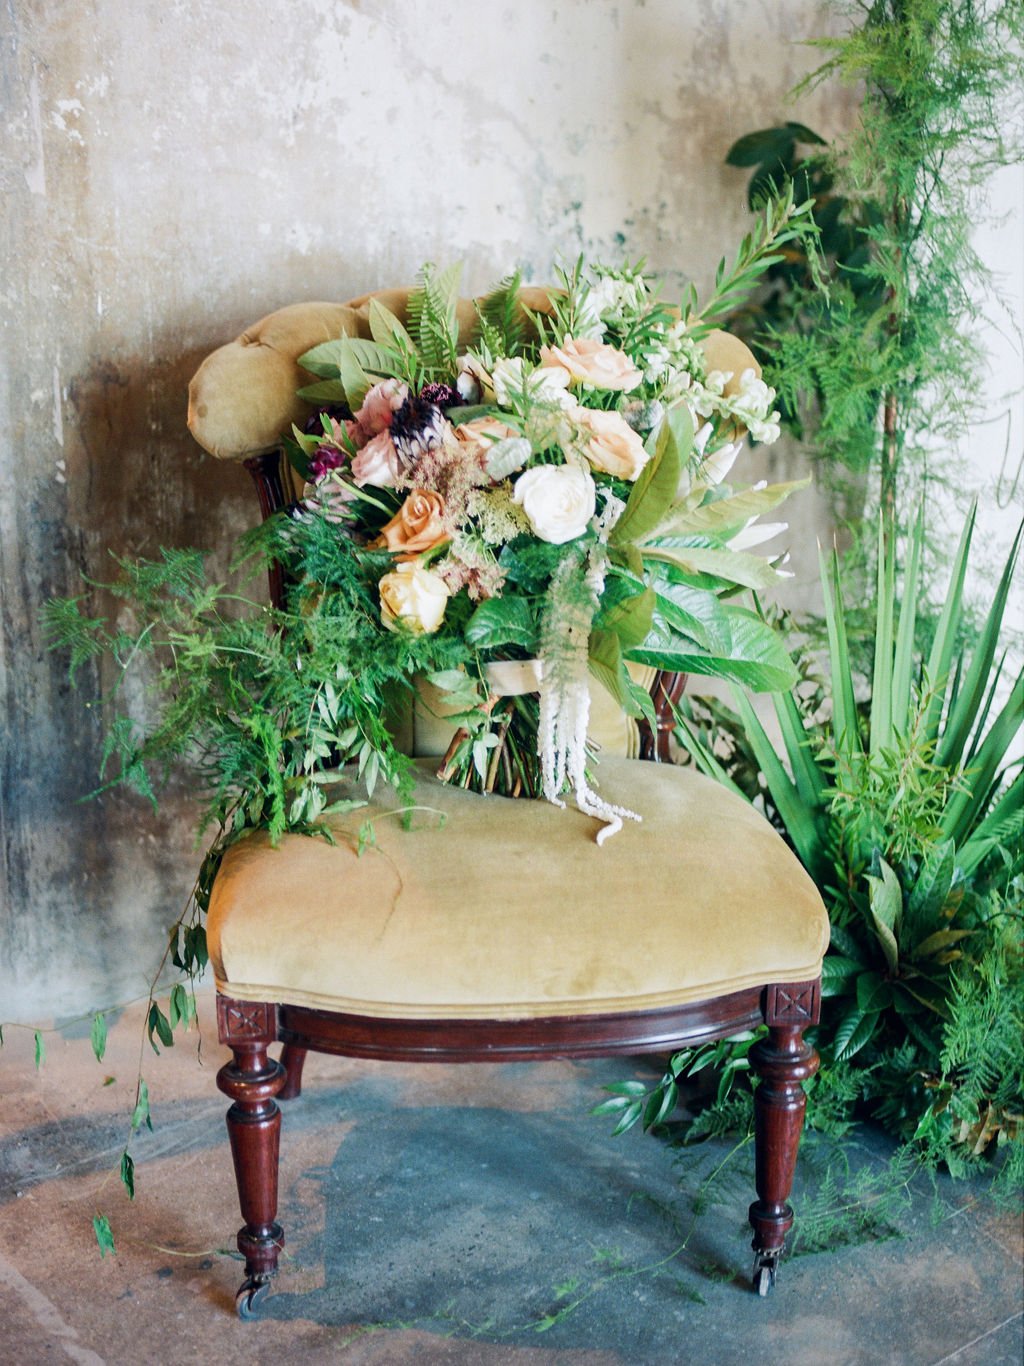 5-things-to-know-before-booking-your-wedding-florist-brought-to-you-by-savannah-wedding-planner-and-savannah-florist-ivory-and-beau-savannah-plant-riverside-district-savannah-wedding-savannah-bridal-shop-maggie-sottero-made-wiith-love-bridal-4.jpg